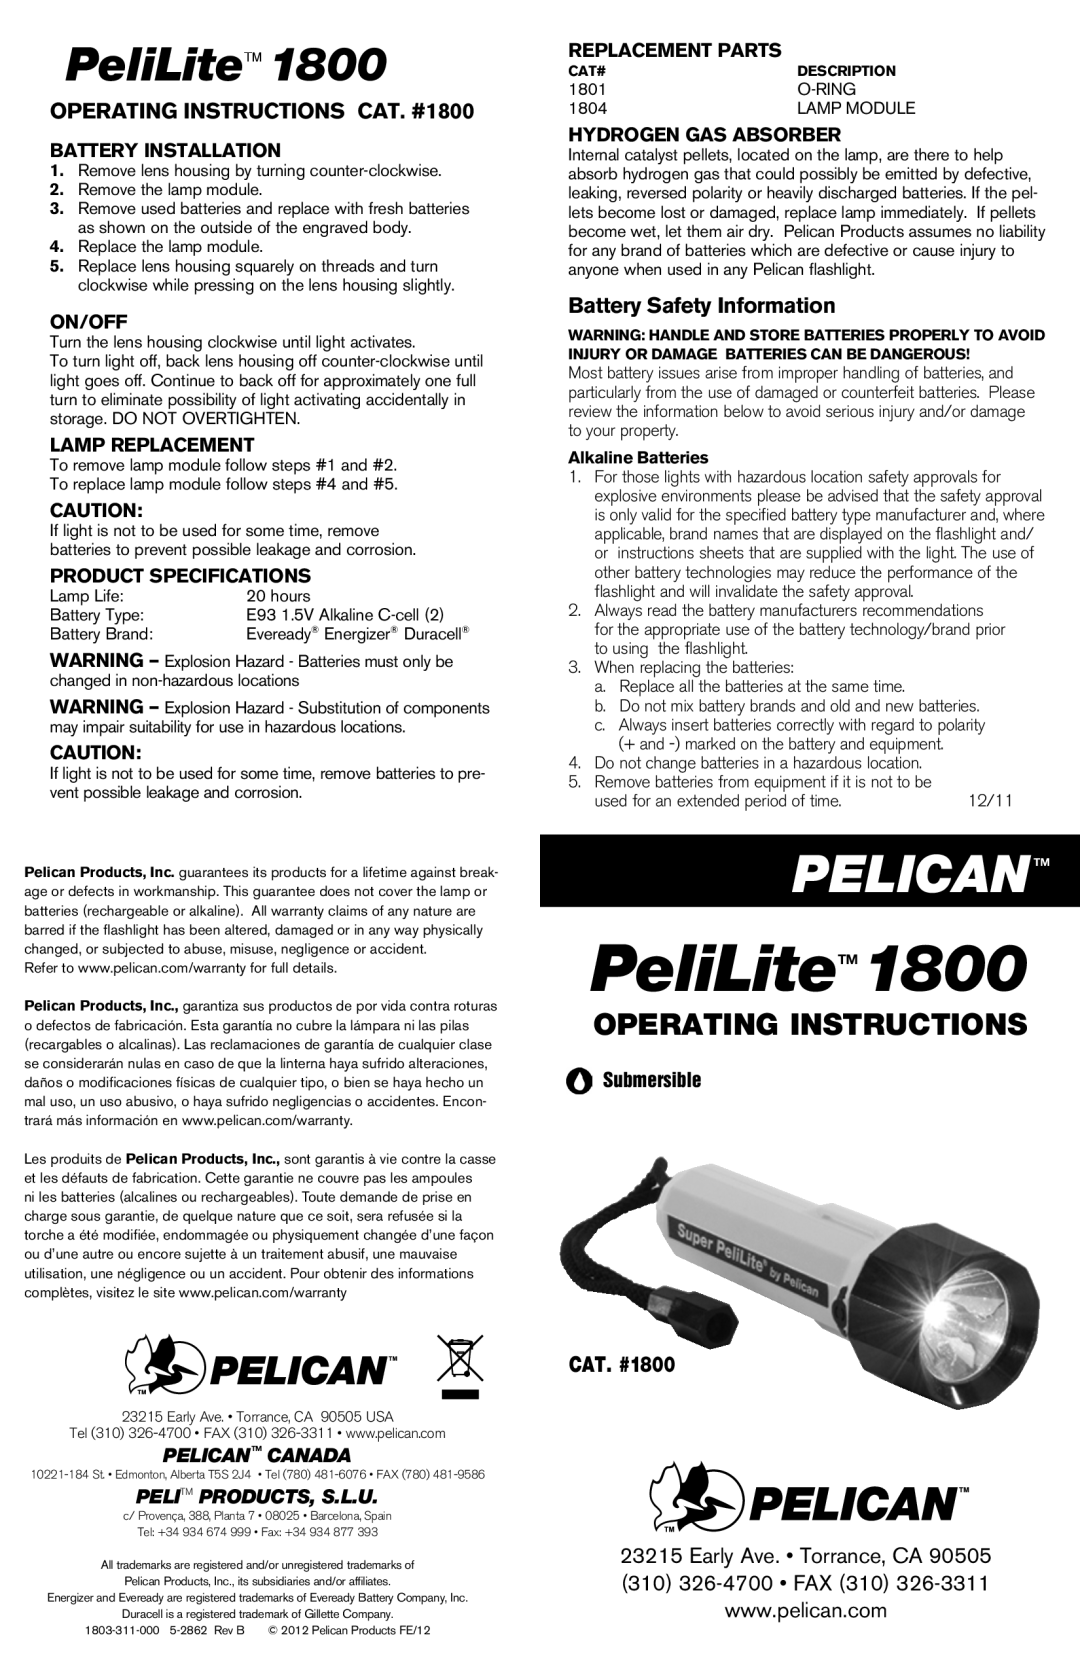 Pelican specifications OPERATING INSTRUCTIONS CAT. #1800, Battery Safety Information, Battery Installation, On/Off 